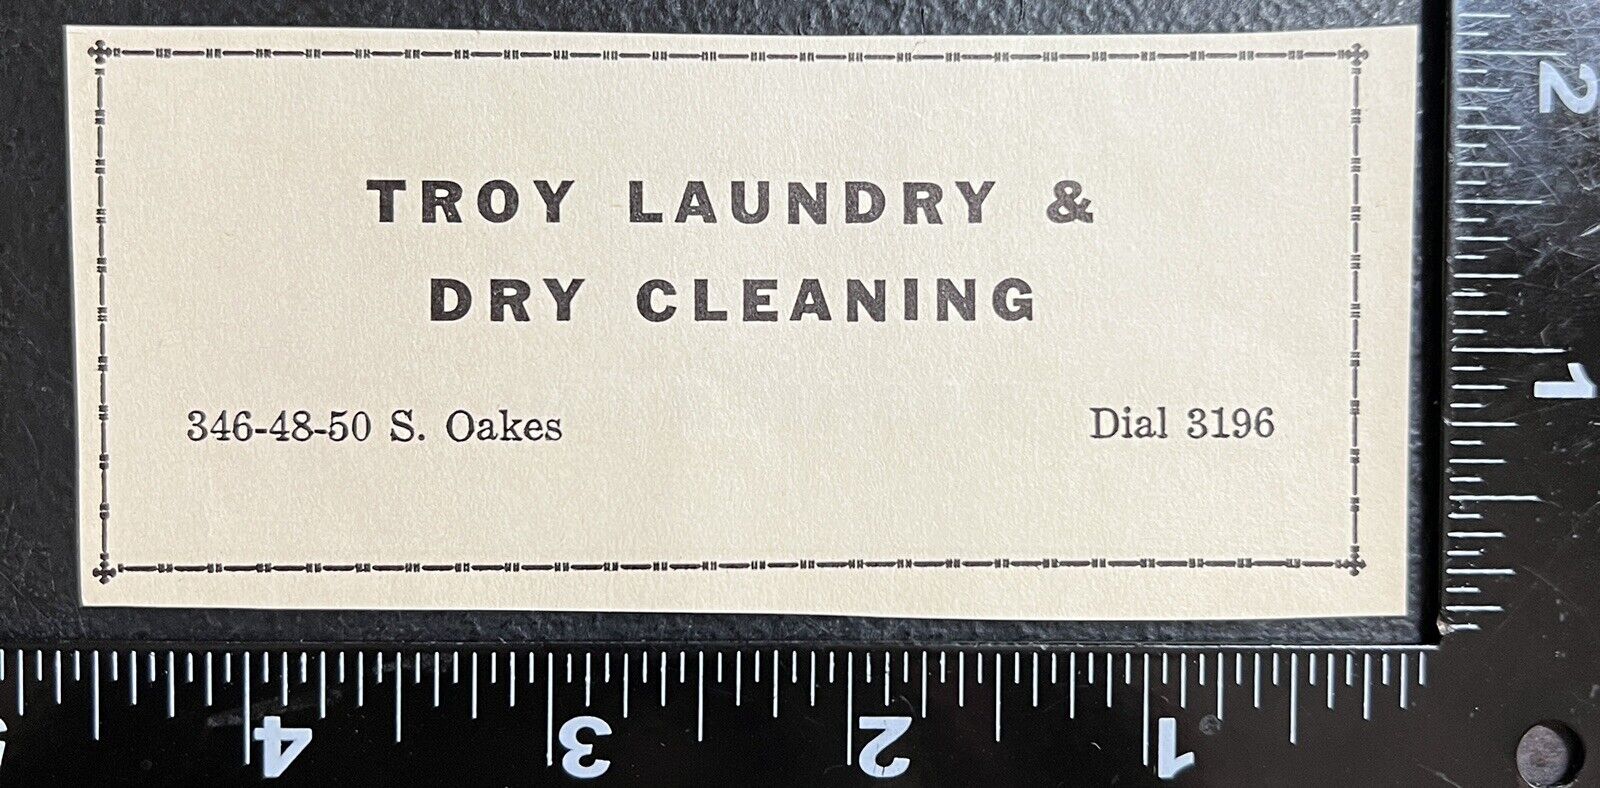 Troy Laundry & Dry Cleaning San Angelo TX 1950’s Advertising Print Ad Original